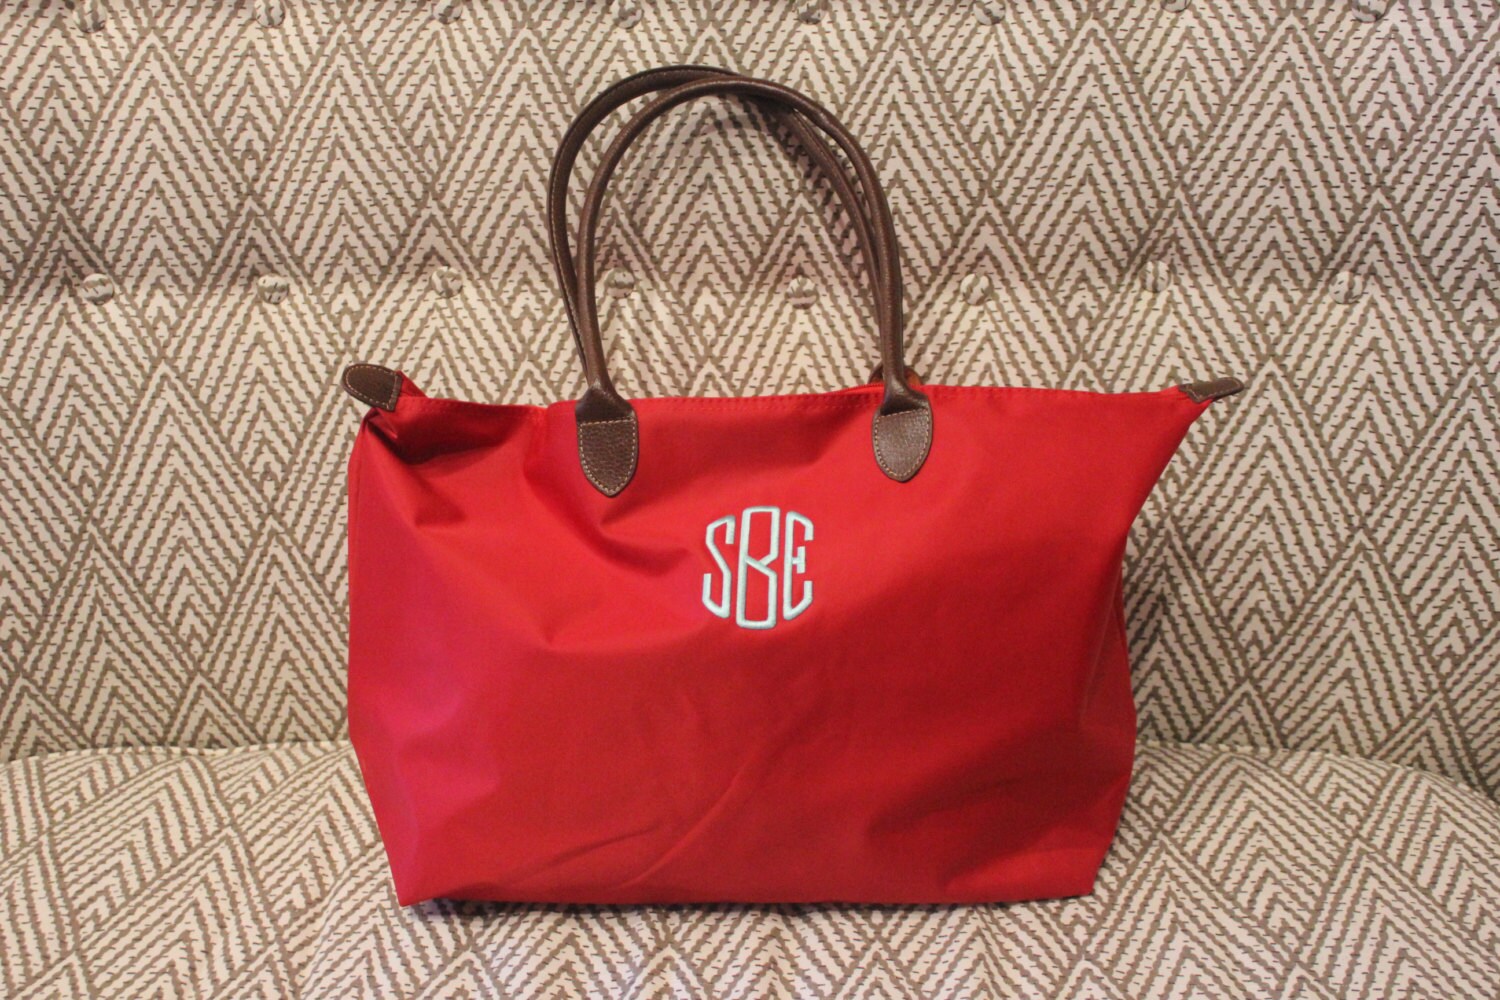 Monogrammed Tote Bag by SocialManor on Etsy